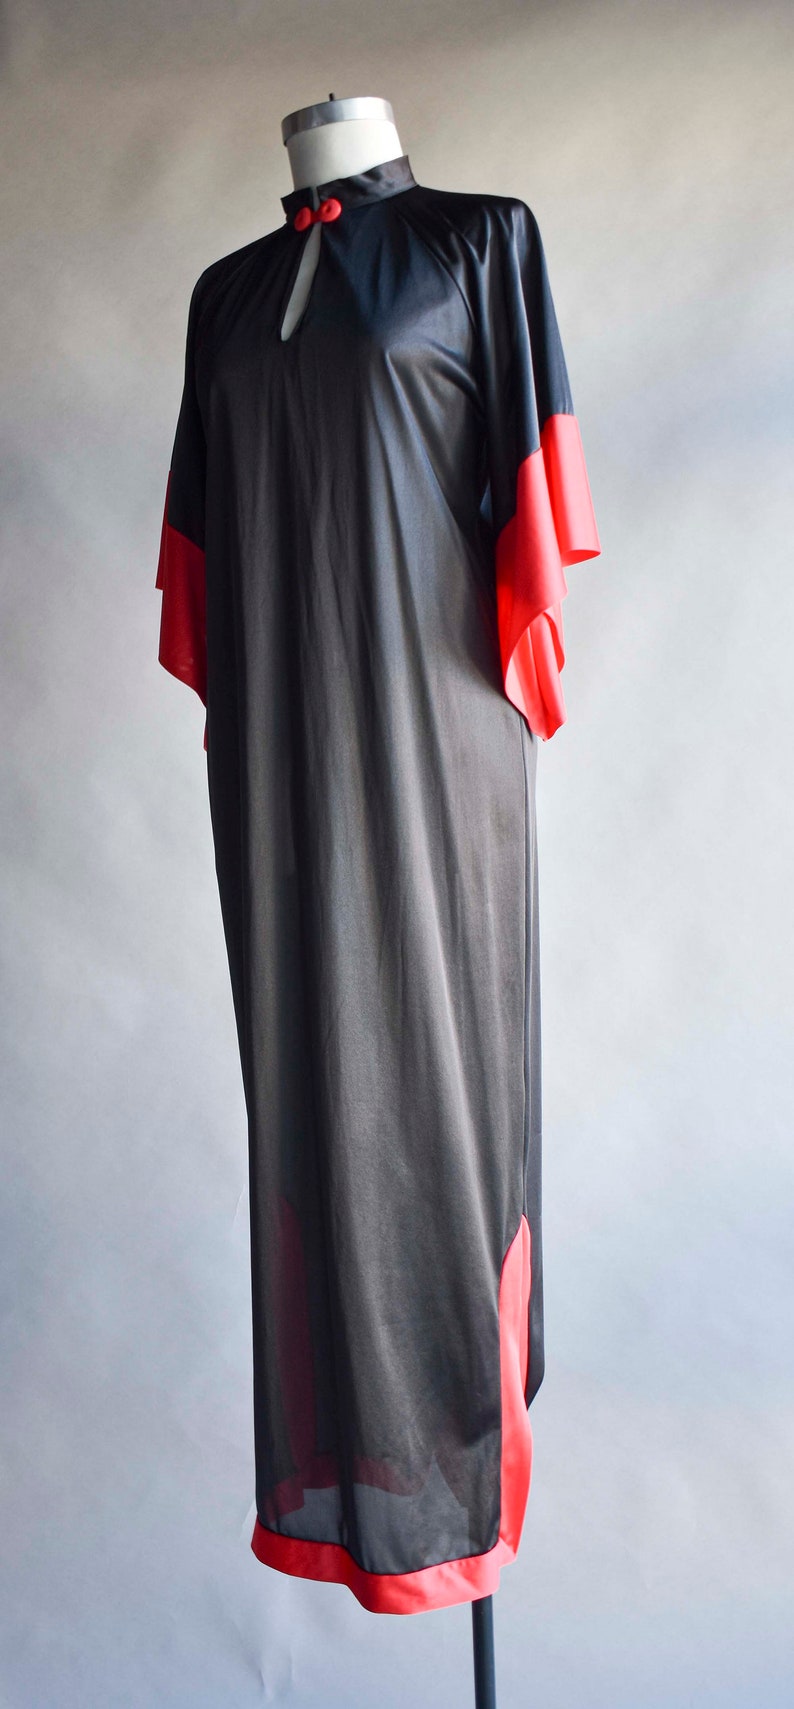 Vintage 70s Black and Red Nightgown / 70s Long Nightgown / Gothic Vintage Nightgown / Red and Black / Black and Red Nightgown / 70s robe image 5